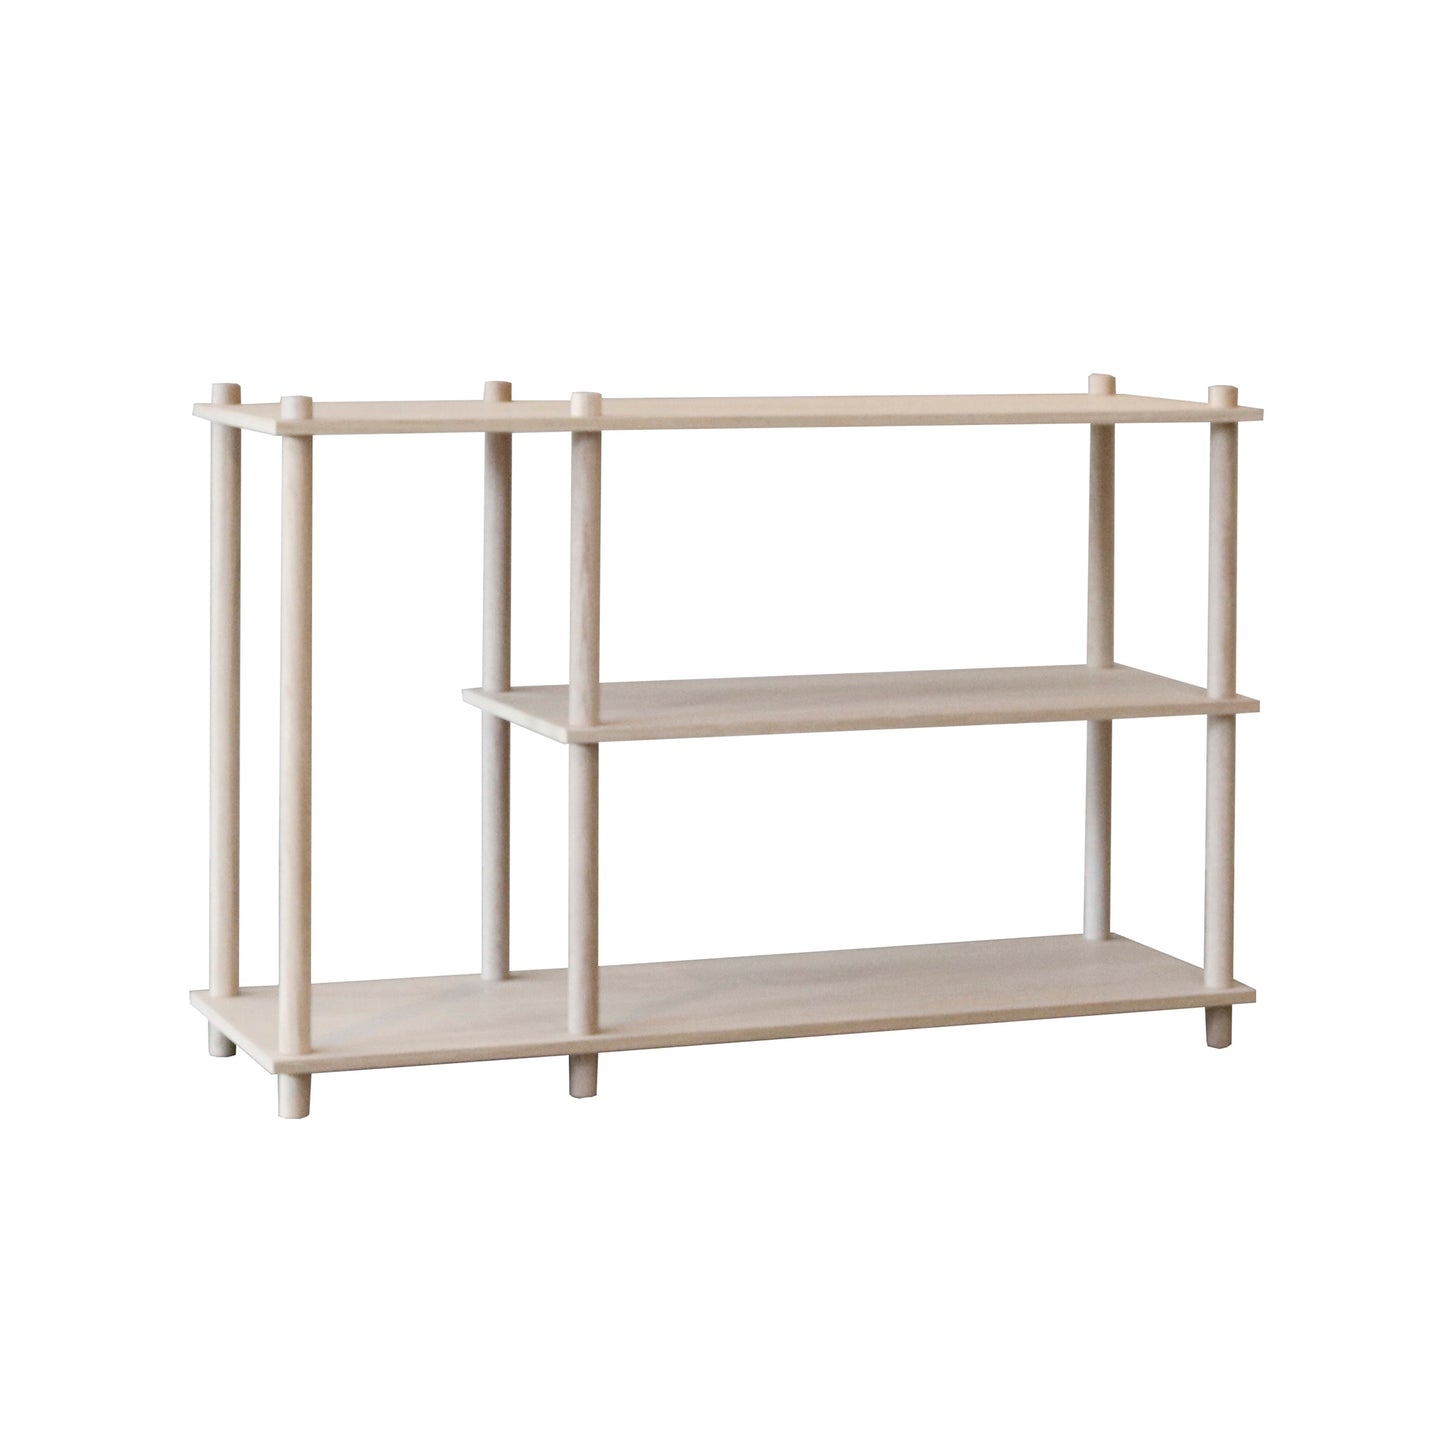 Elevate Shelving - System 3 by Woud